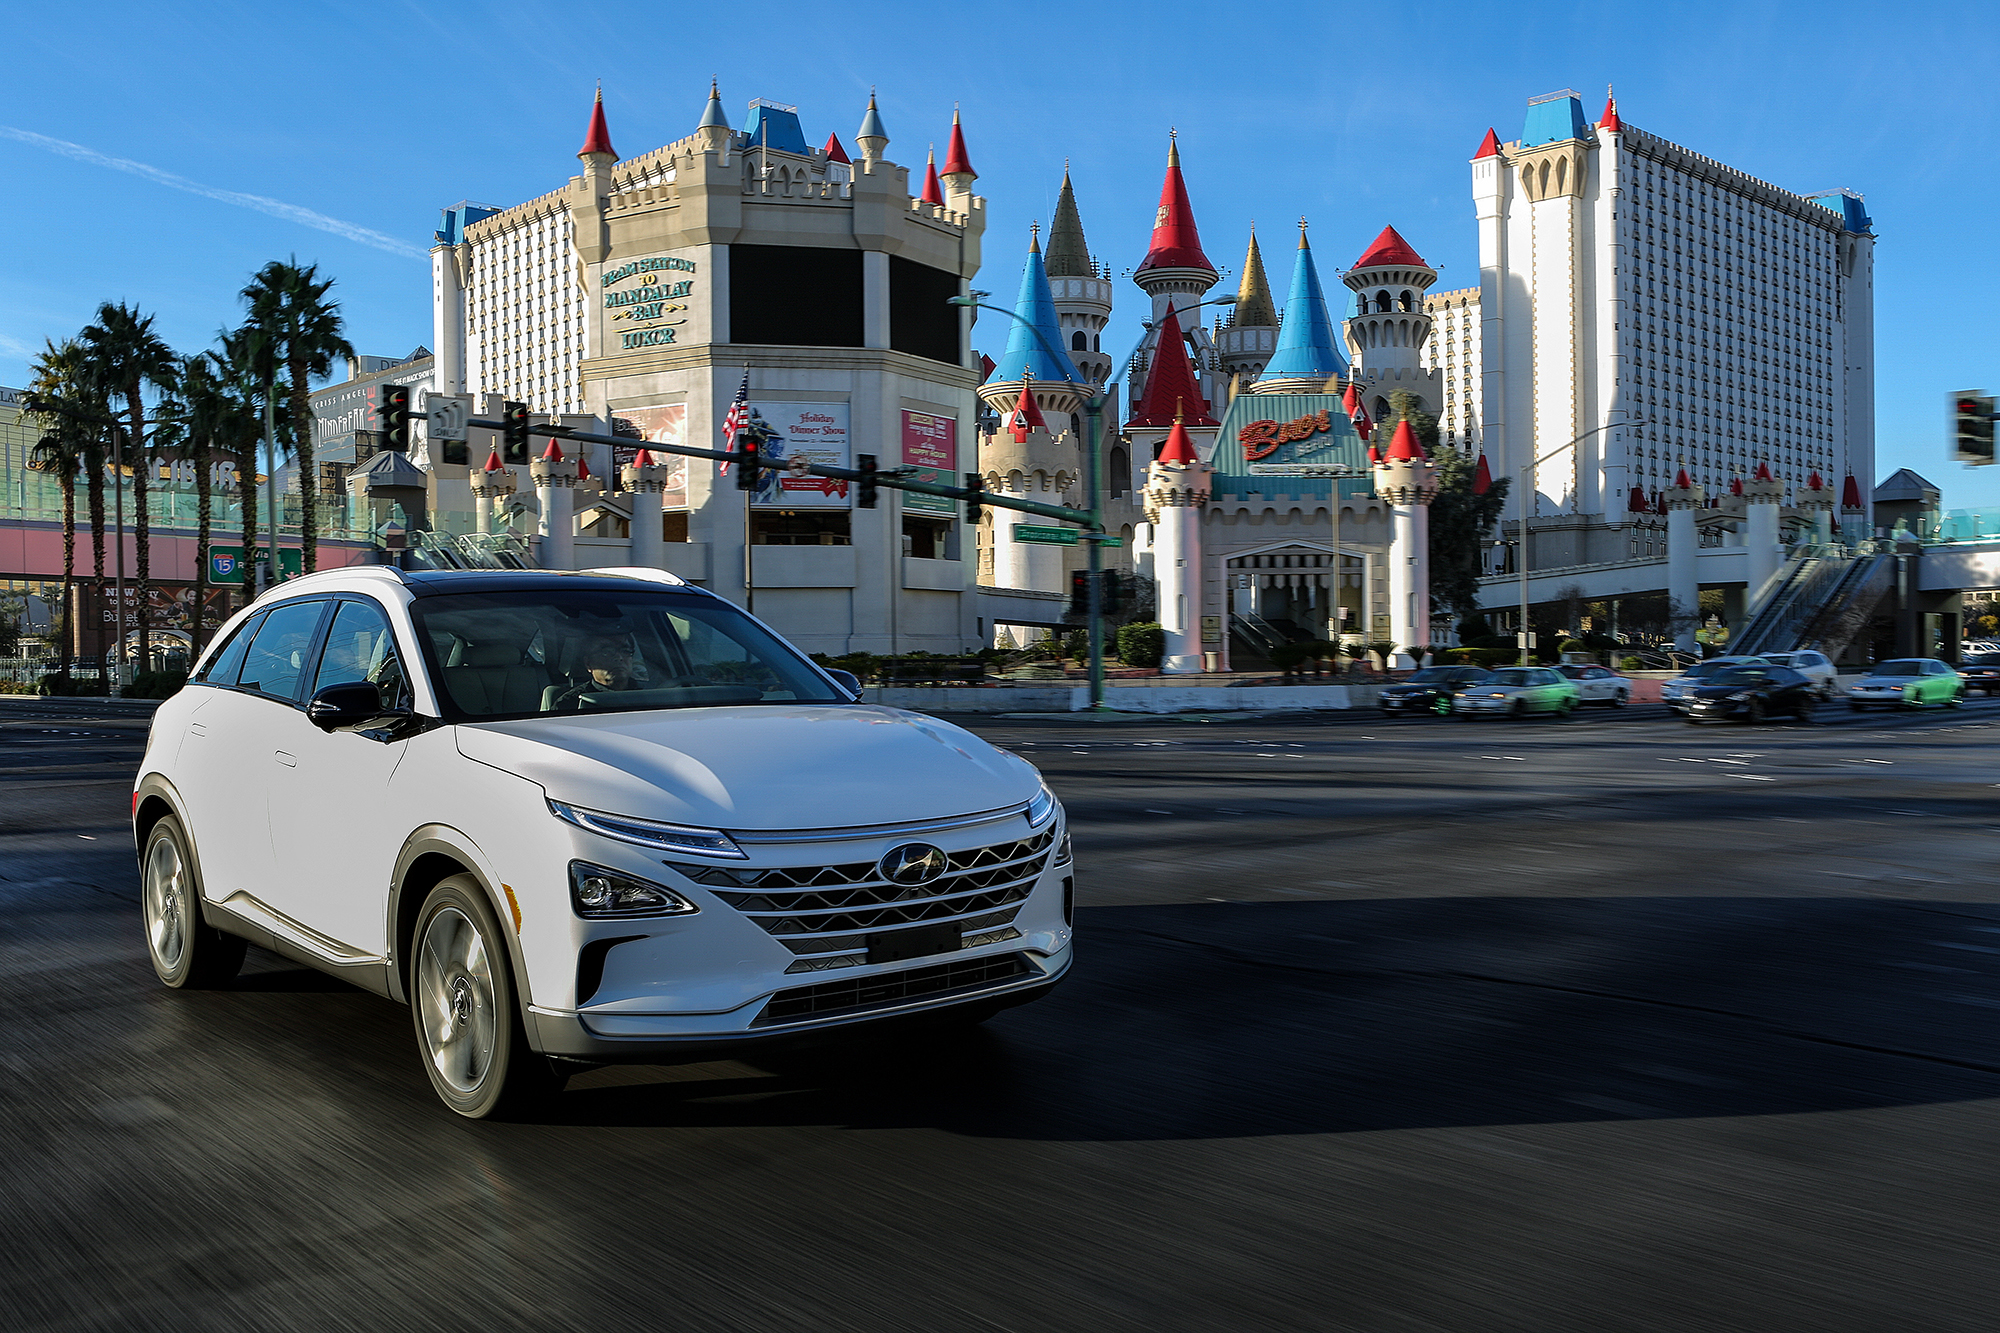 NEXO: The Next-Generation Fuel Cell Vehicle from Hyundai